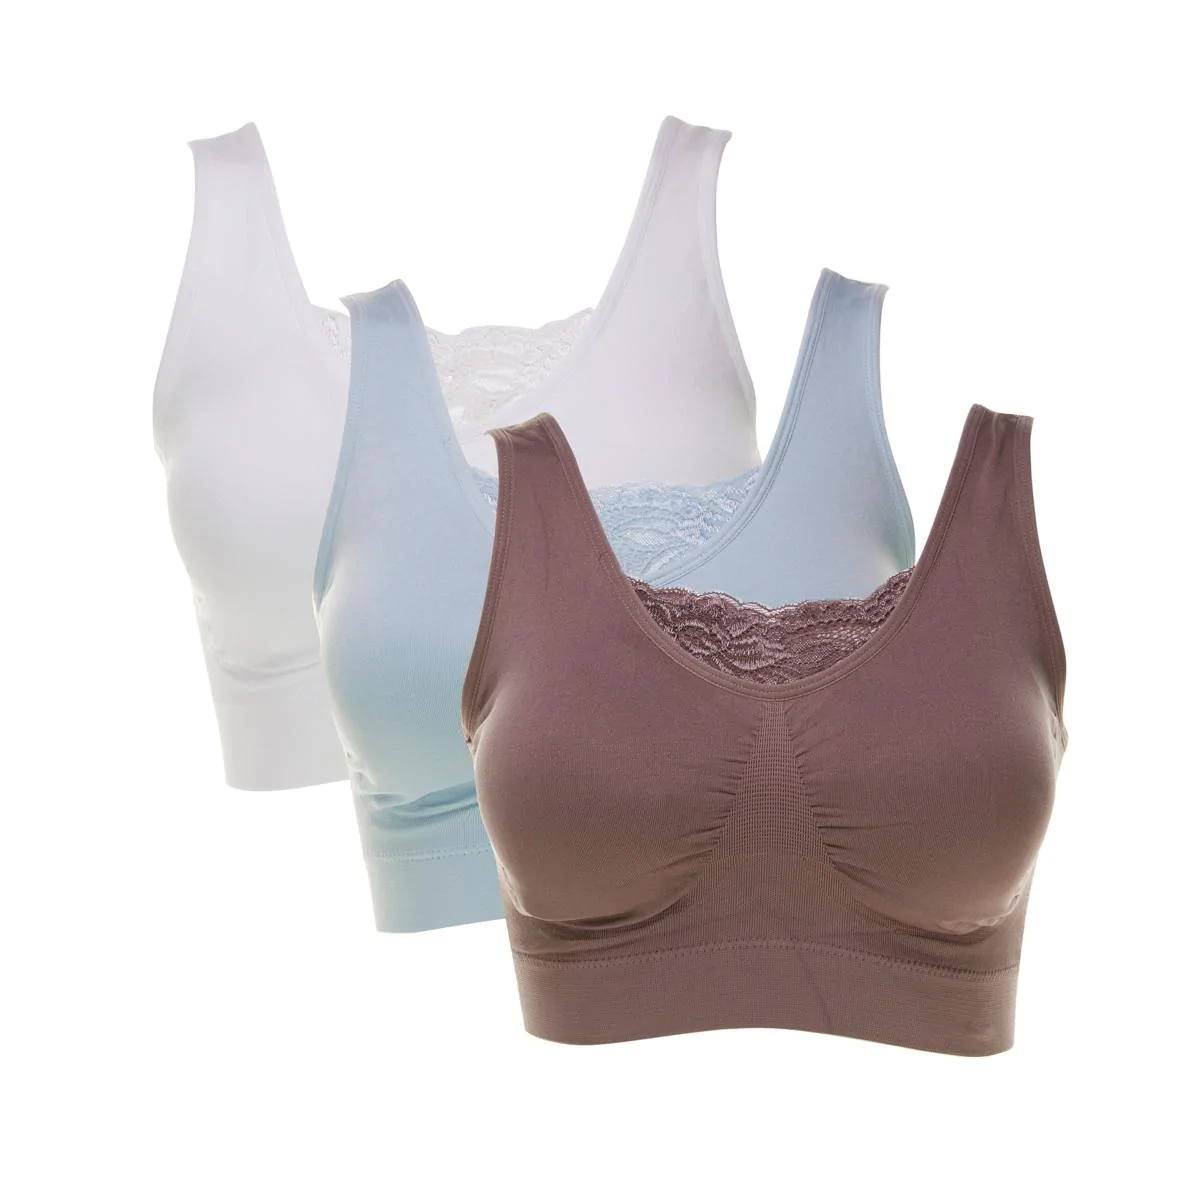 Rhonda Shear Ahh Bra 3-pack with Lace Inset 586821-J